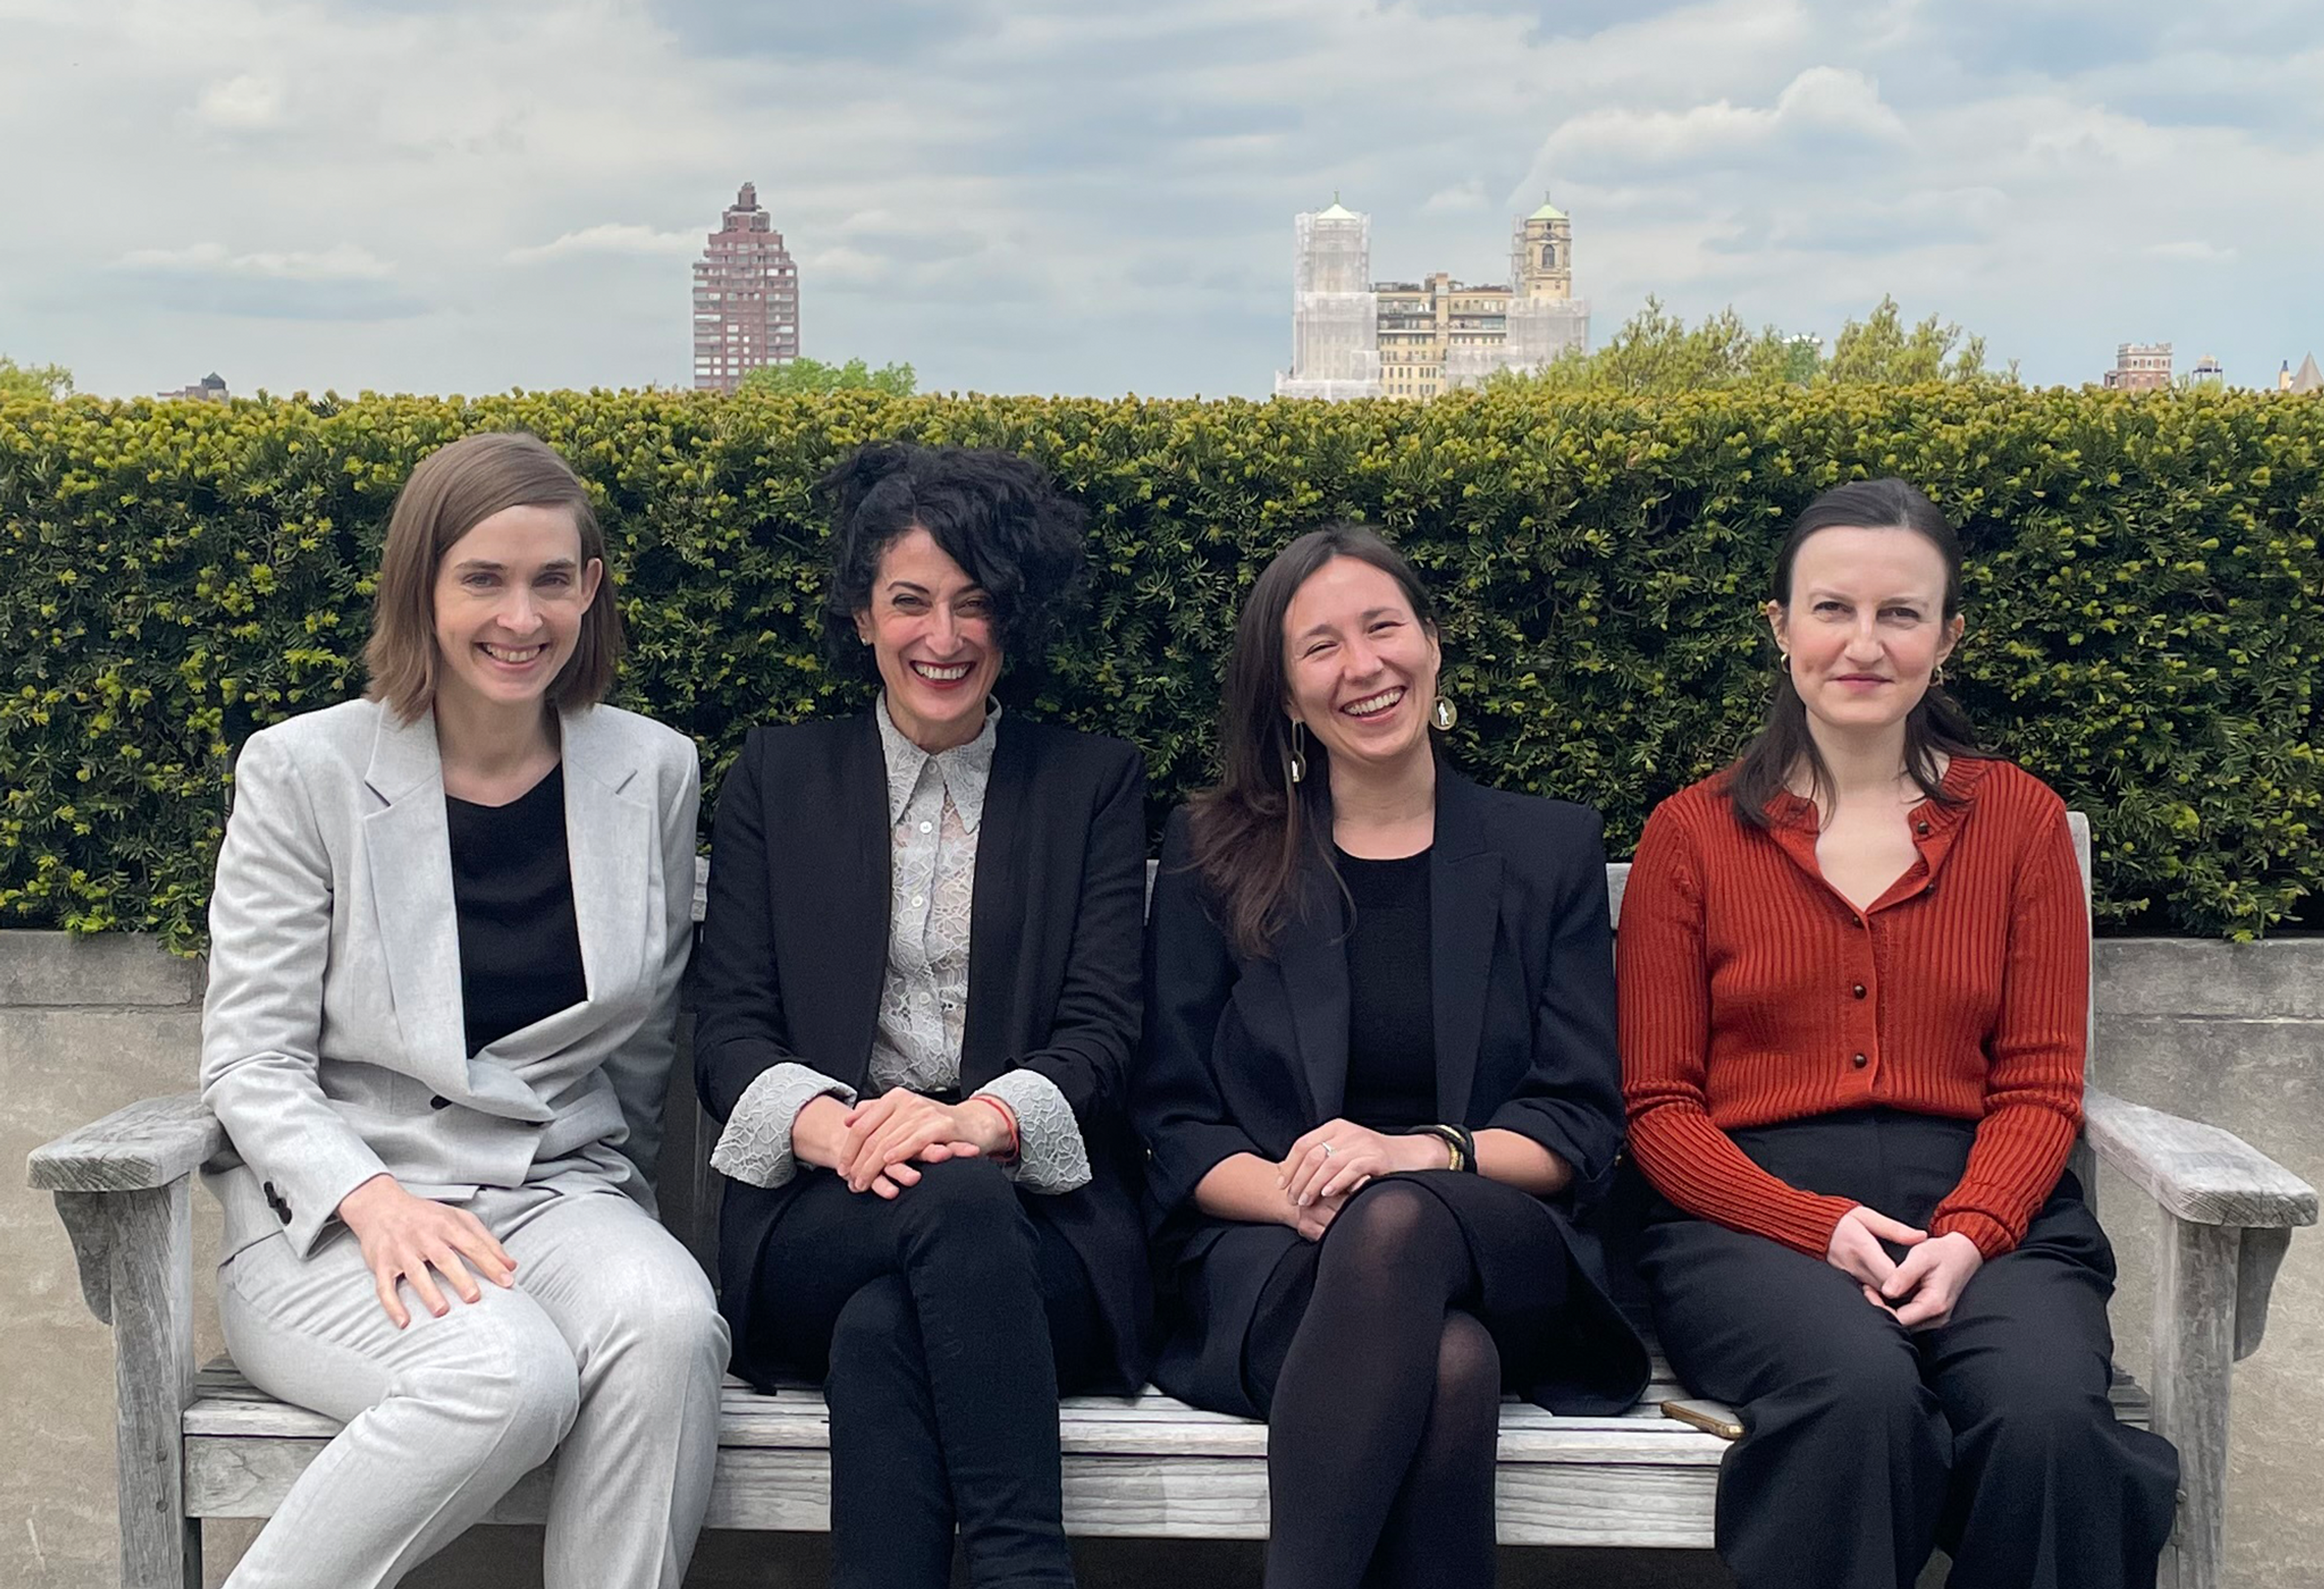 Four current fellows smiling and sitting on the roof of the Met with shrubbery and part of the city skyline in the background